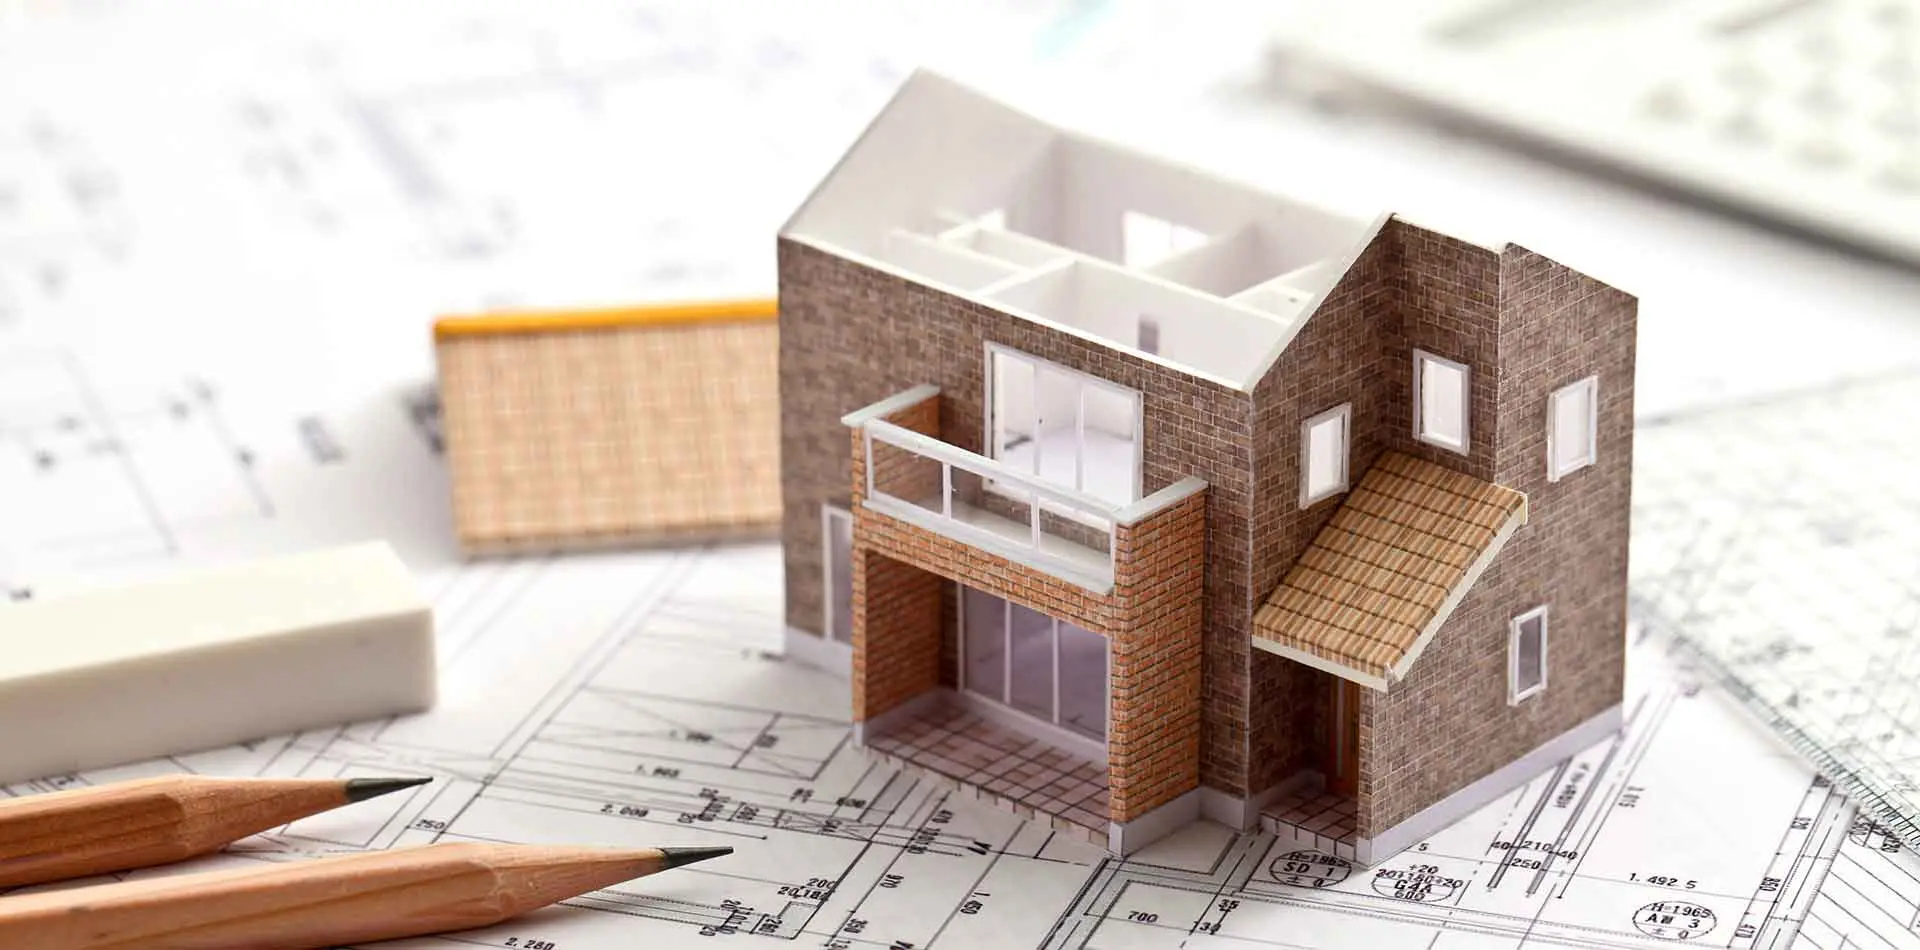 A miniature house is in the middle of the construction plan of a real house, with pencils and erasers on its left side.